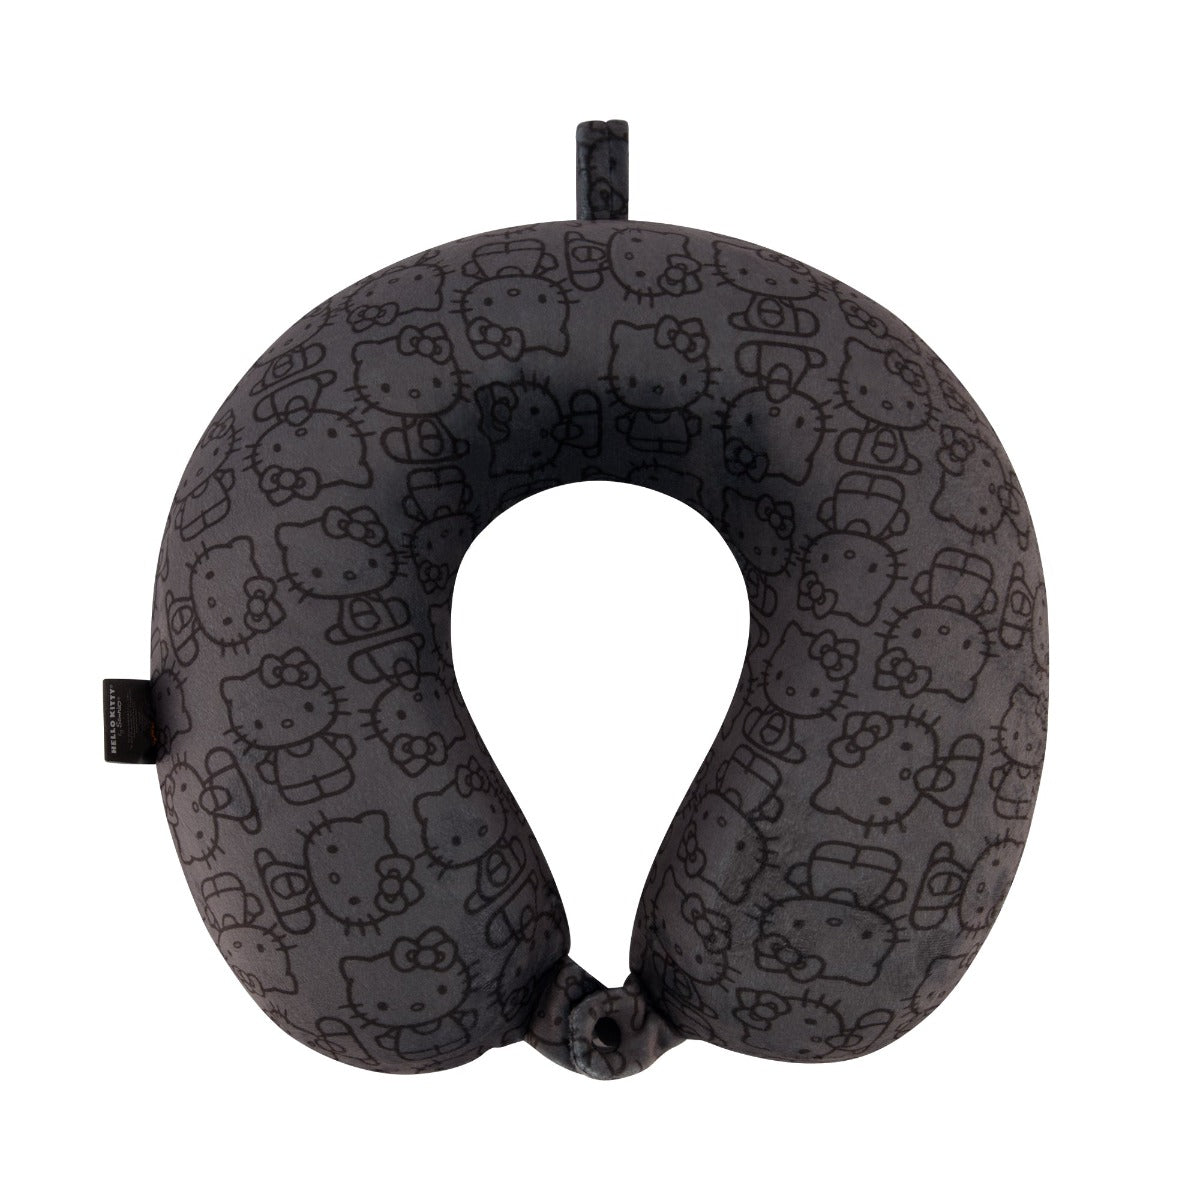 Black Ful Hello Kitty all over icon memory foam neck pillow - best travel pillows for traveling